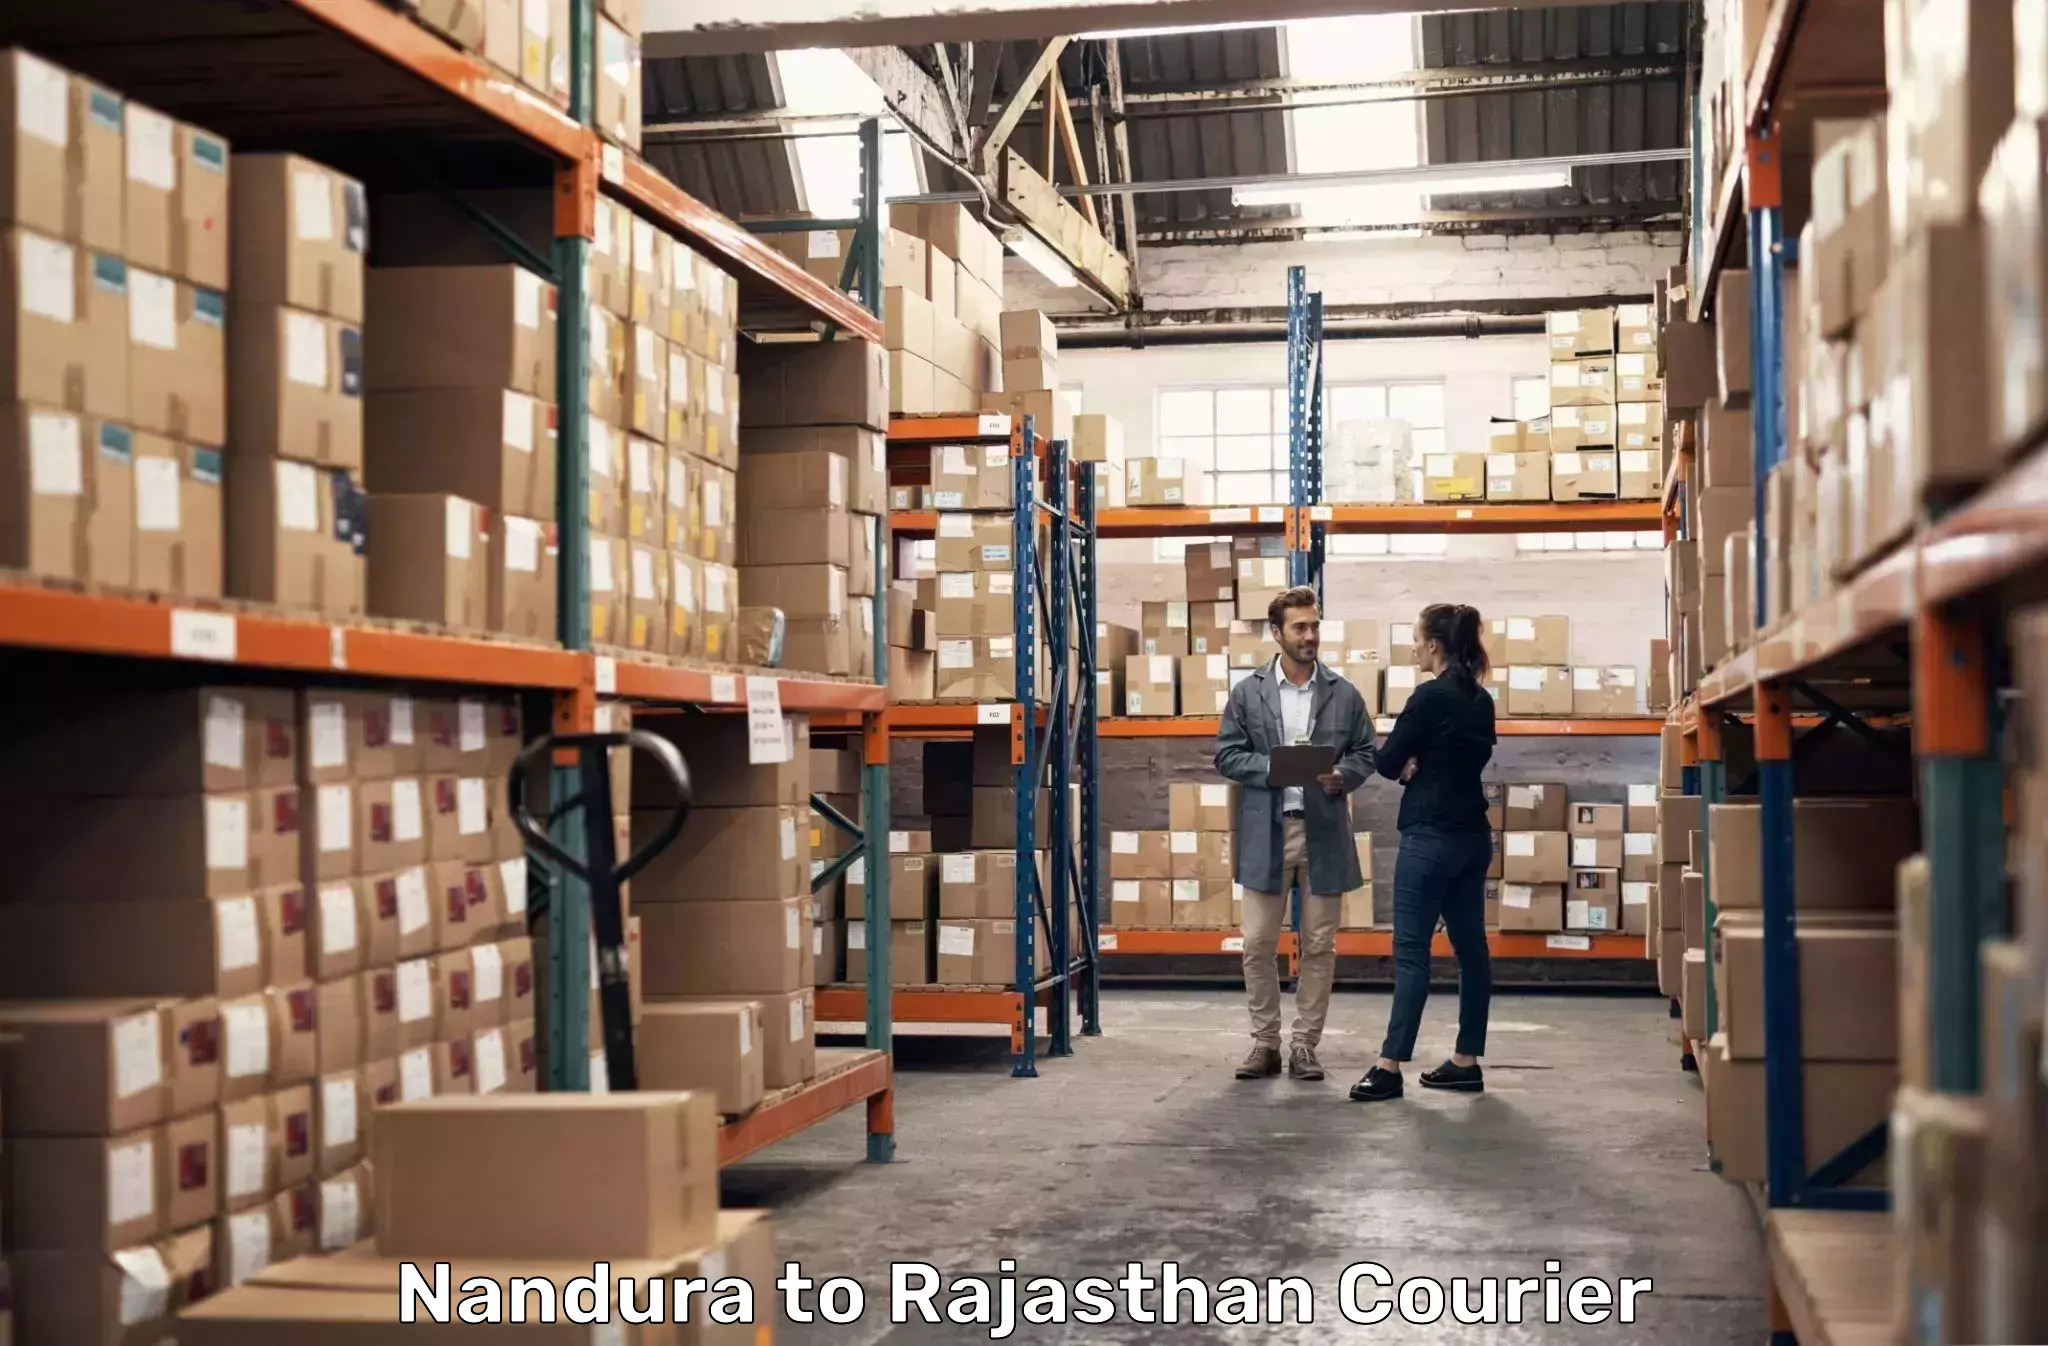 Courier service innovation in Nandura to Rajasthan